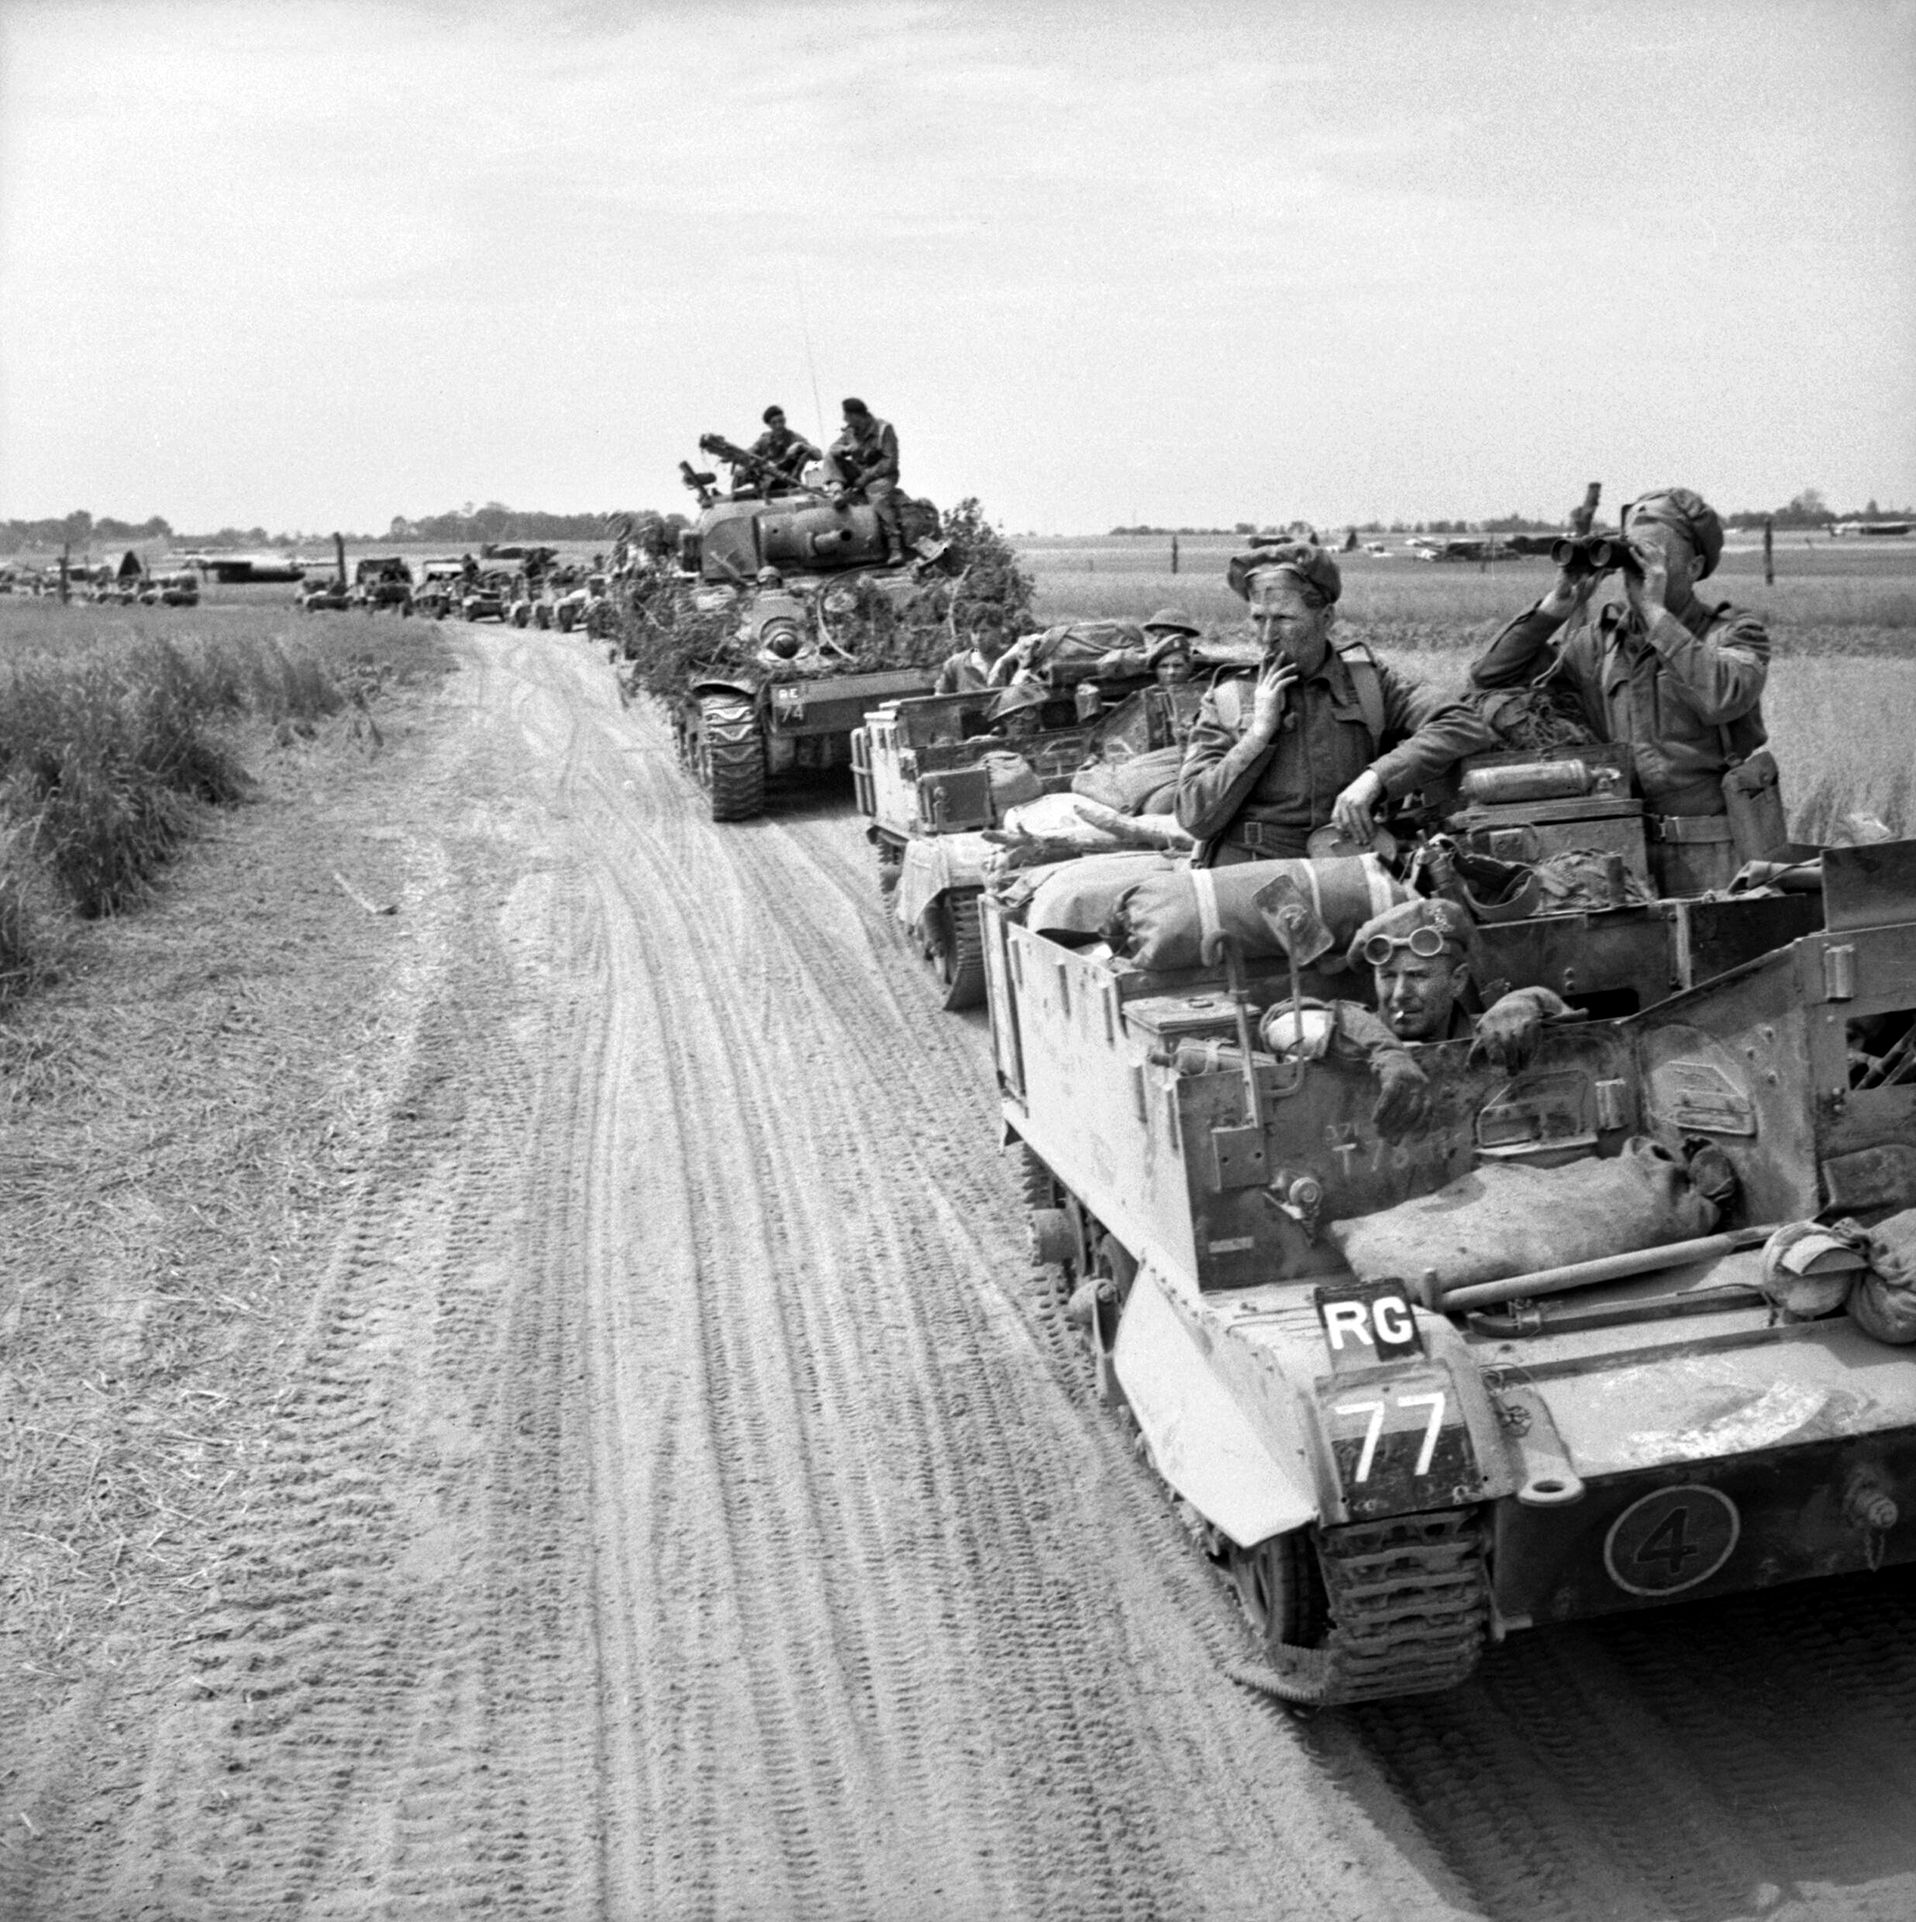 During the opening day of Operation Goodwood, British troops aboard Bren gun carriers advance toward their objective near Caen. A Sherman tank being utilized as an artillery unit headquarters accompanies the infantrymen.